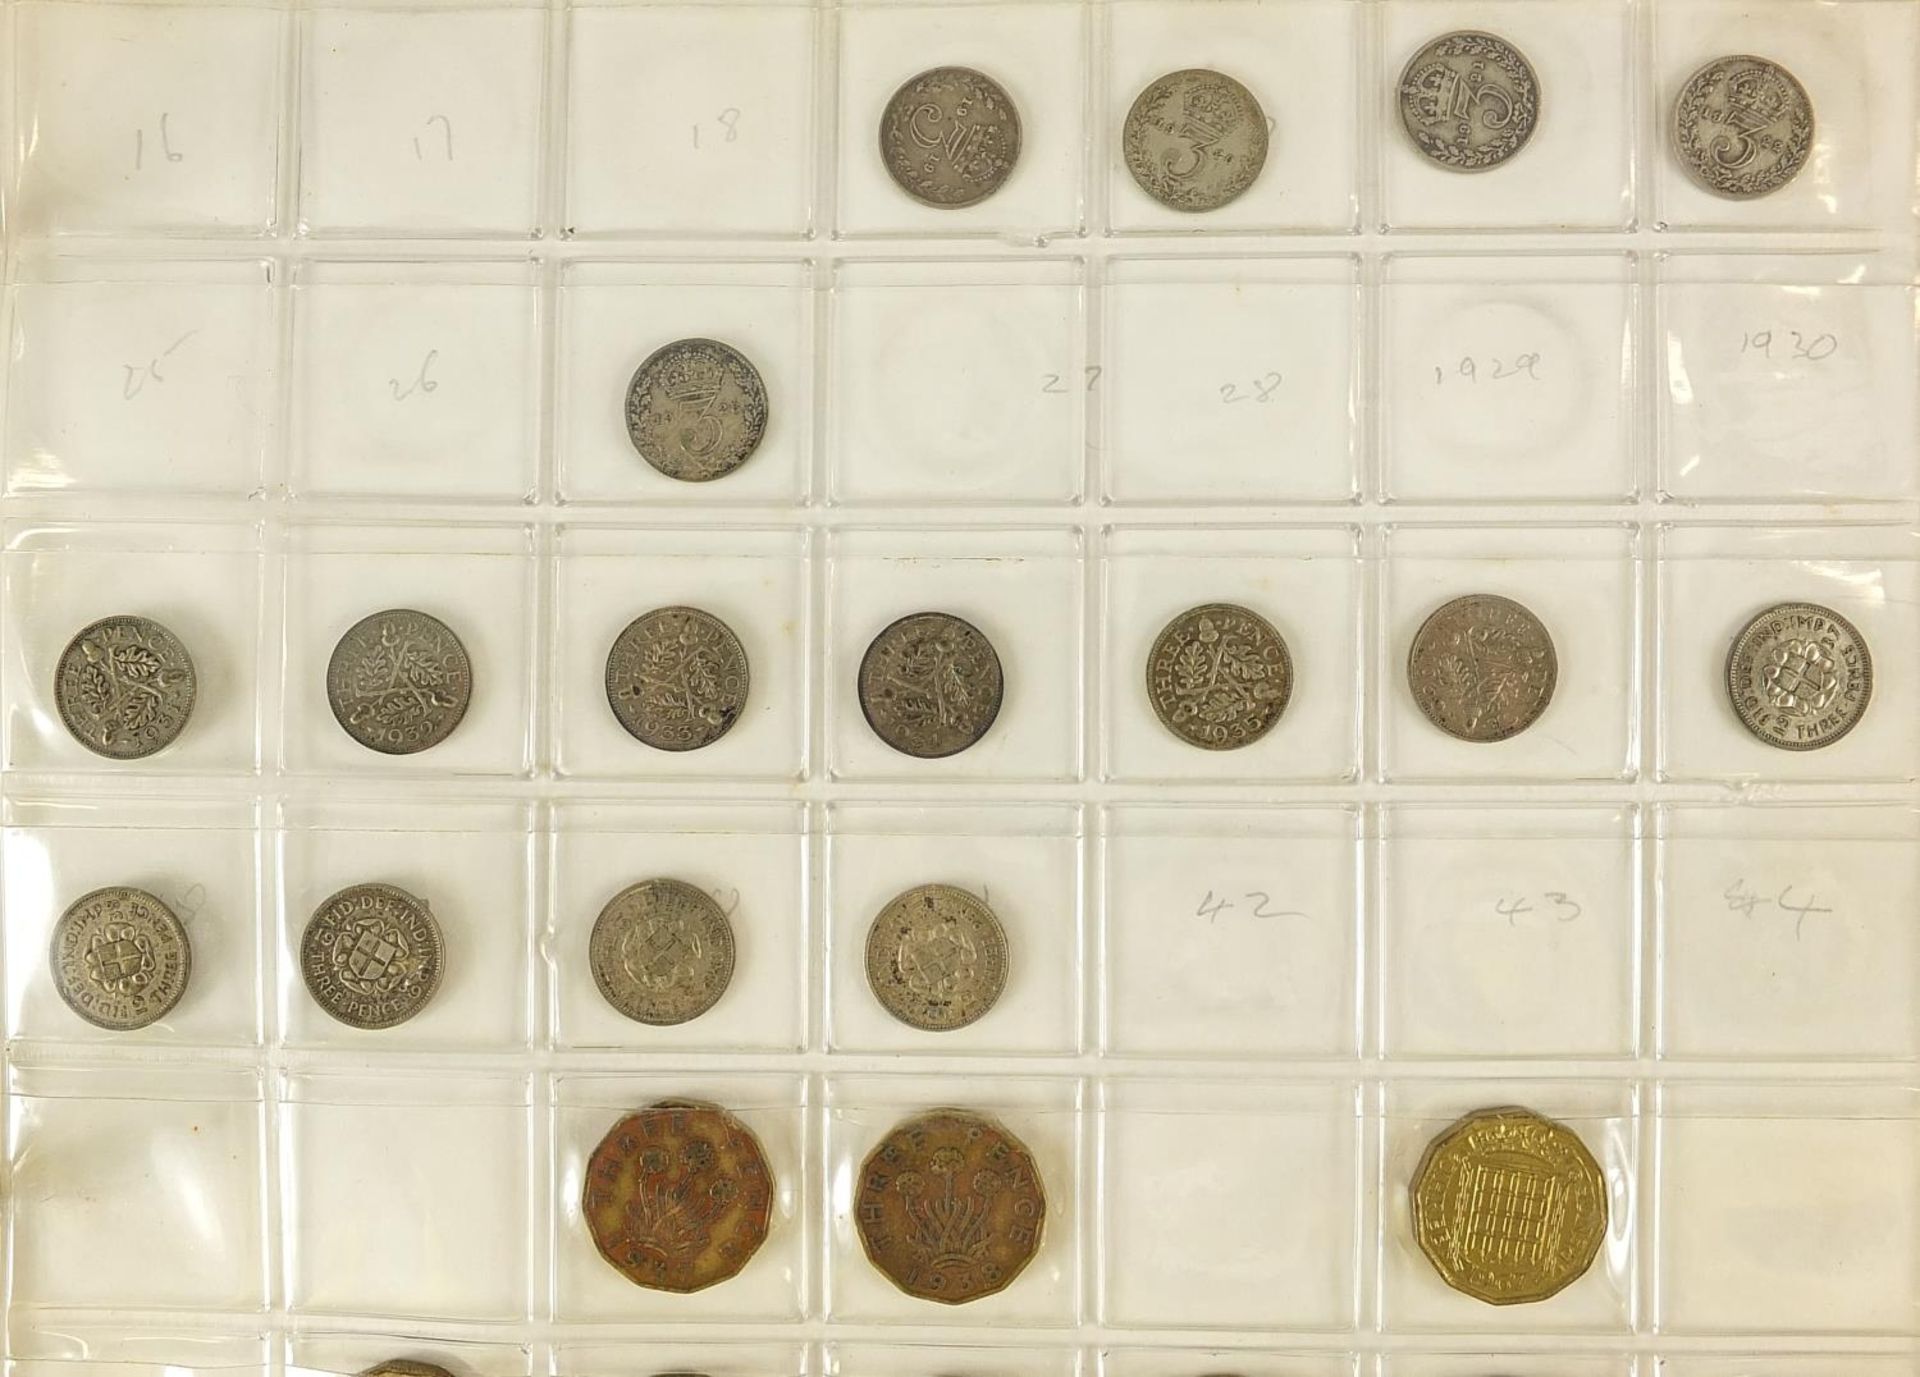 Victorian and later British coinage including silver threepenny bits arranged in an album - Image 2 of 6